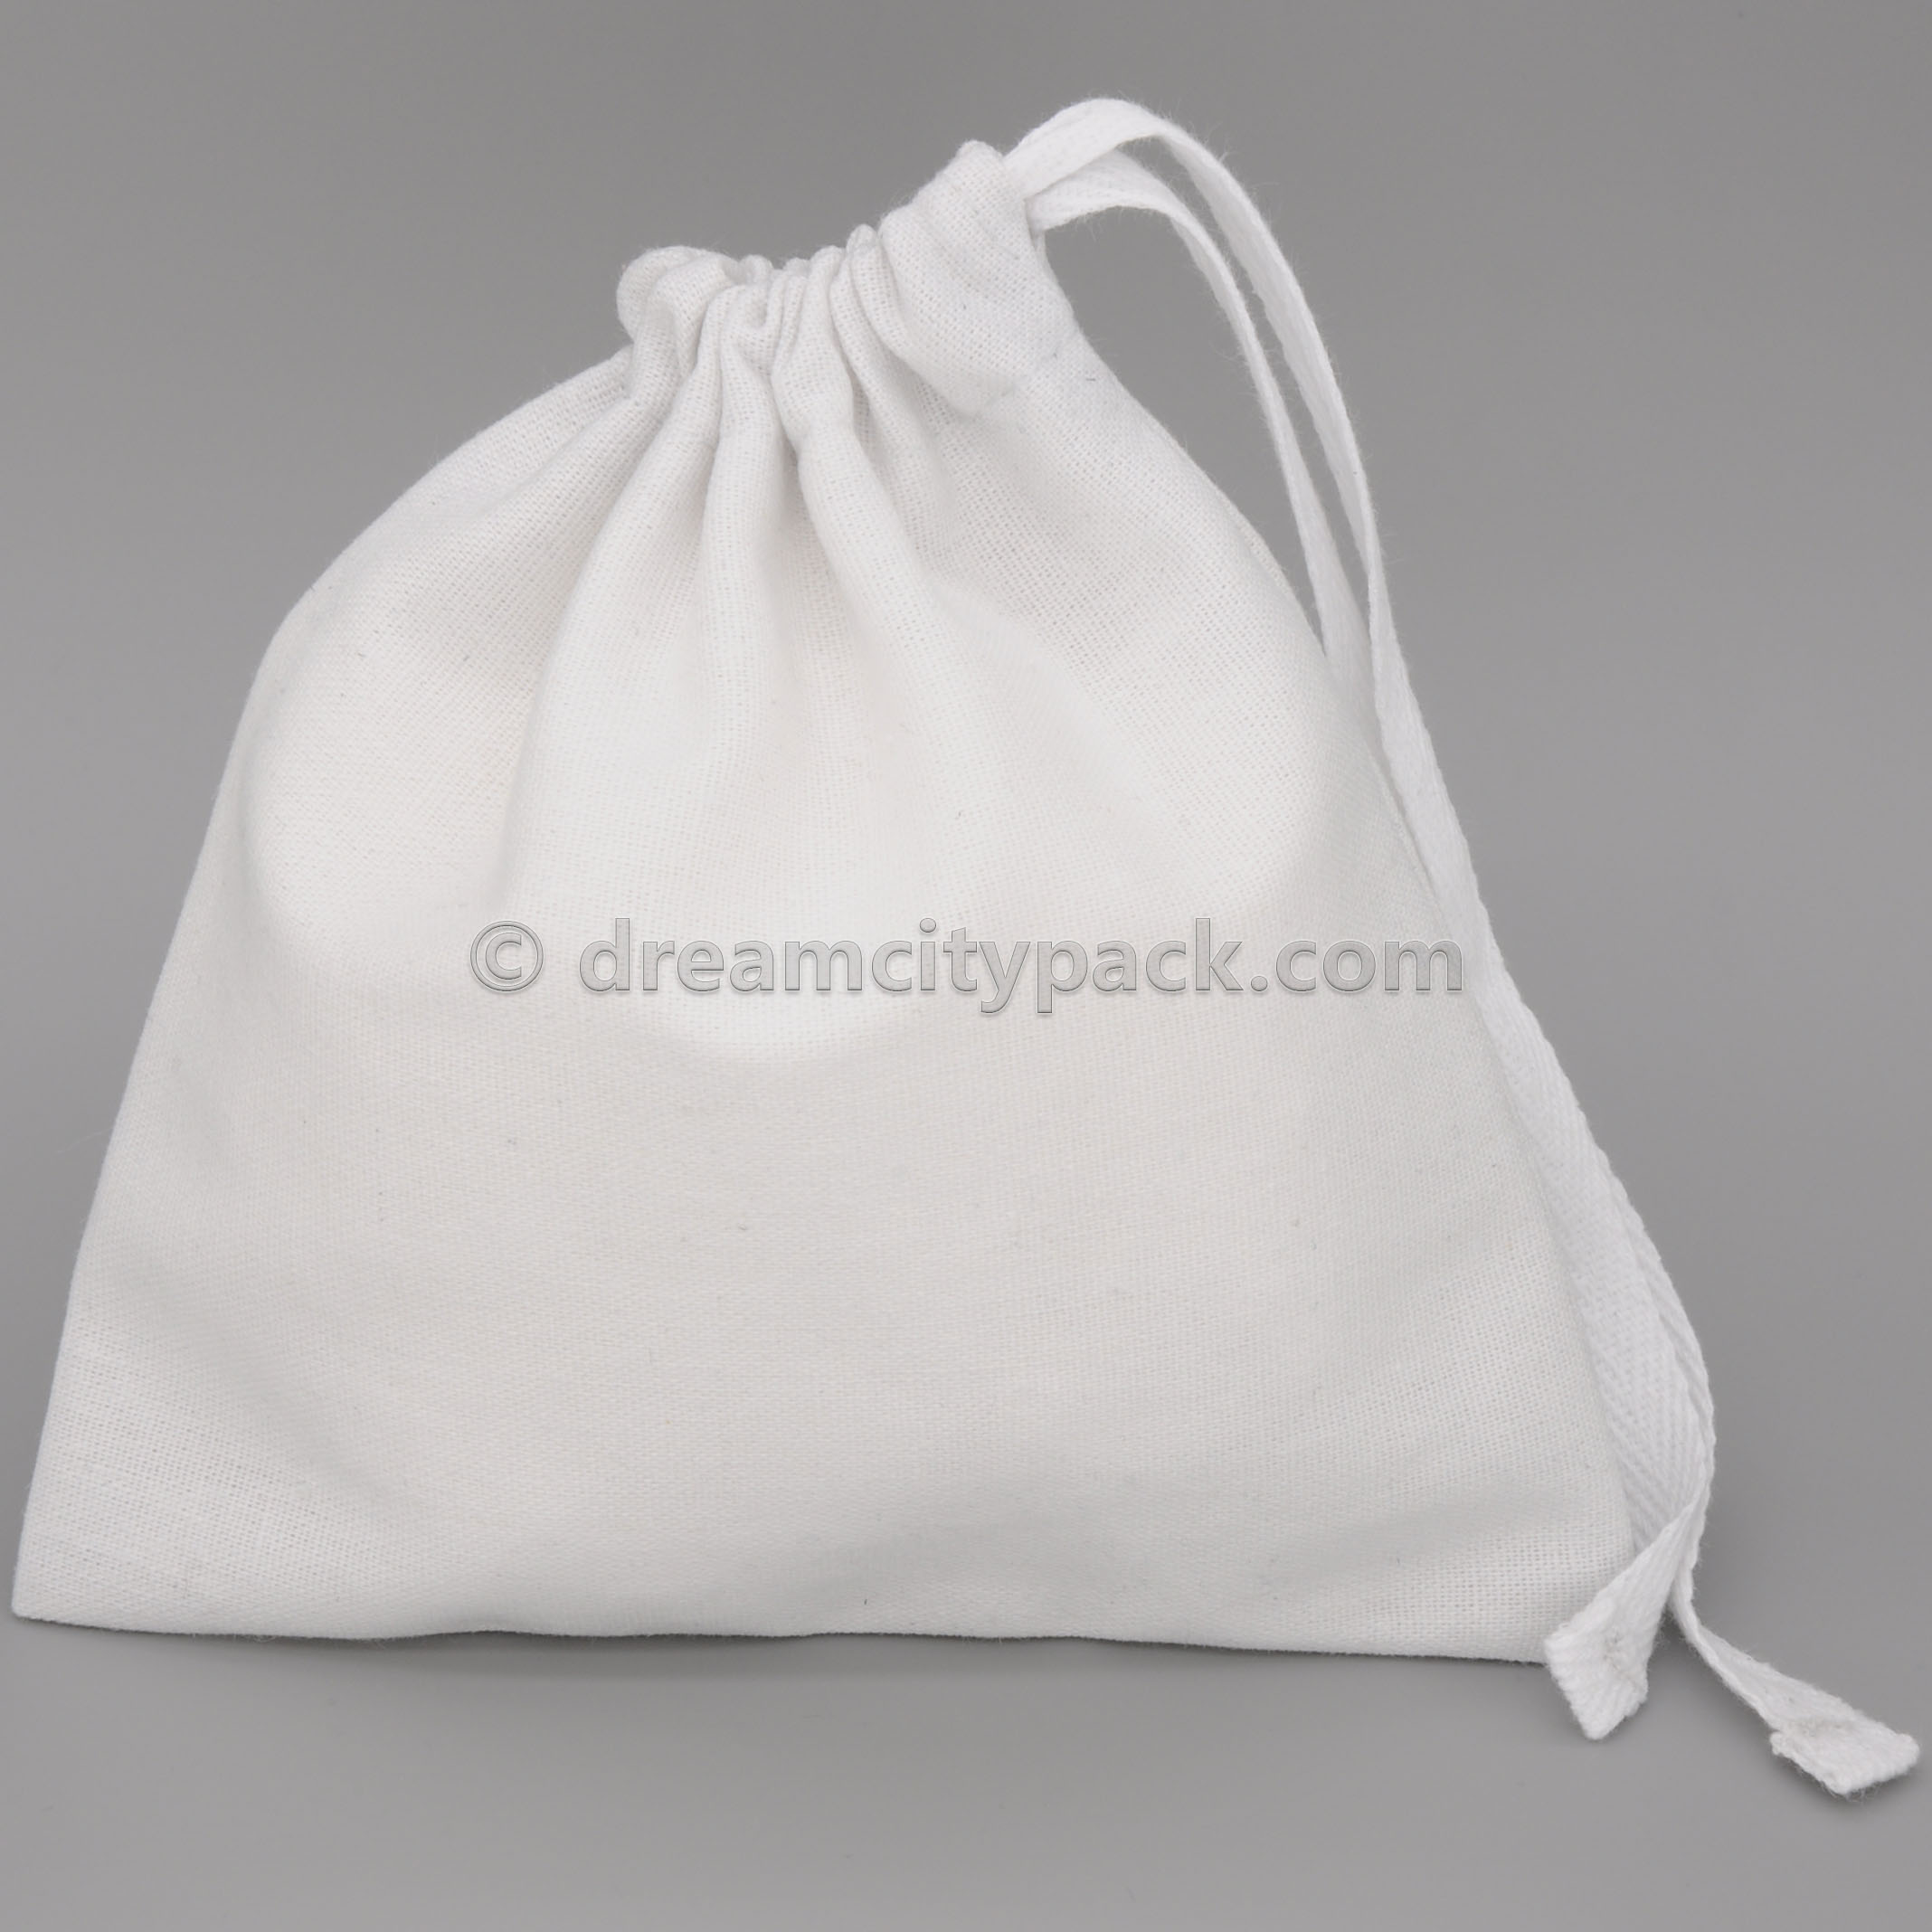 Custom Cotton Dust Bags for Handbags Extra Large | Dreamcity Packaging